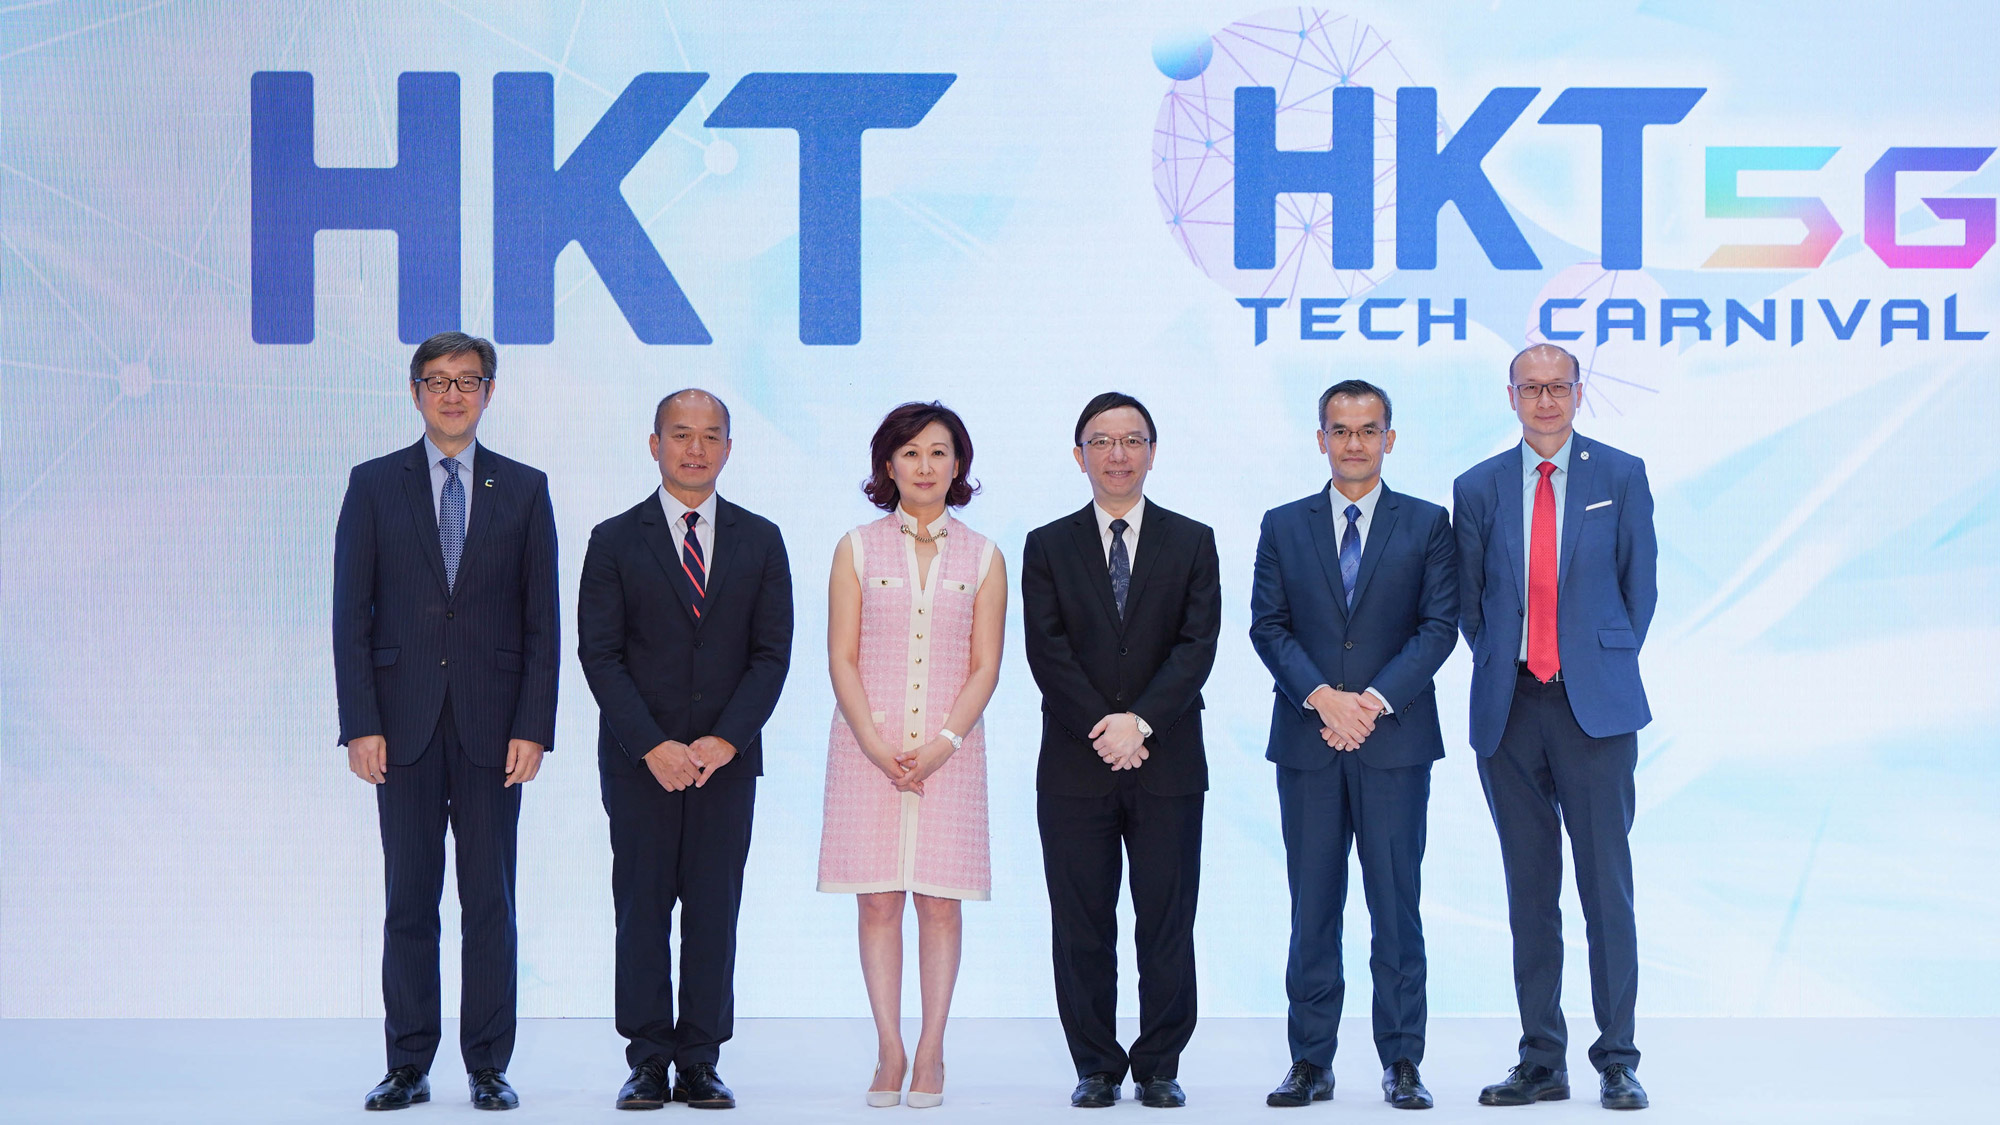 Mr. Victor Lam, Government Chief Information Officer (third right), in group photo with Ms. Susanna Hui, Group Managing Director of HKT (third left), Mr. Peter Yan, Chief Executive Officer of Cyberport (first left), Mr. ST Liew, Vice President of Qualcomm Technologies Inc. (second left),  Mr. Hugh Chow, Chief Executive Officer of Applied Science and Technology Research Institute (second right) and Mr. Peter Yeung, Head of Electronics & ICT Clusters, Smart City Platform, Hong Kong Science & Technology Parks Corporation, at the opening ceremony of HKT 5G Tech Carnival.